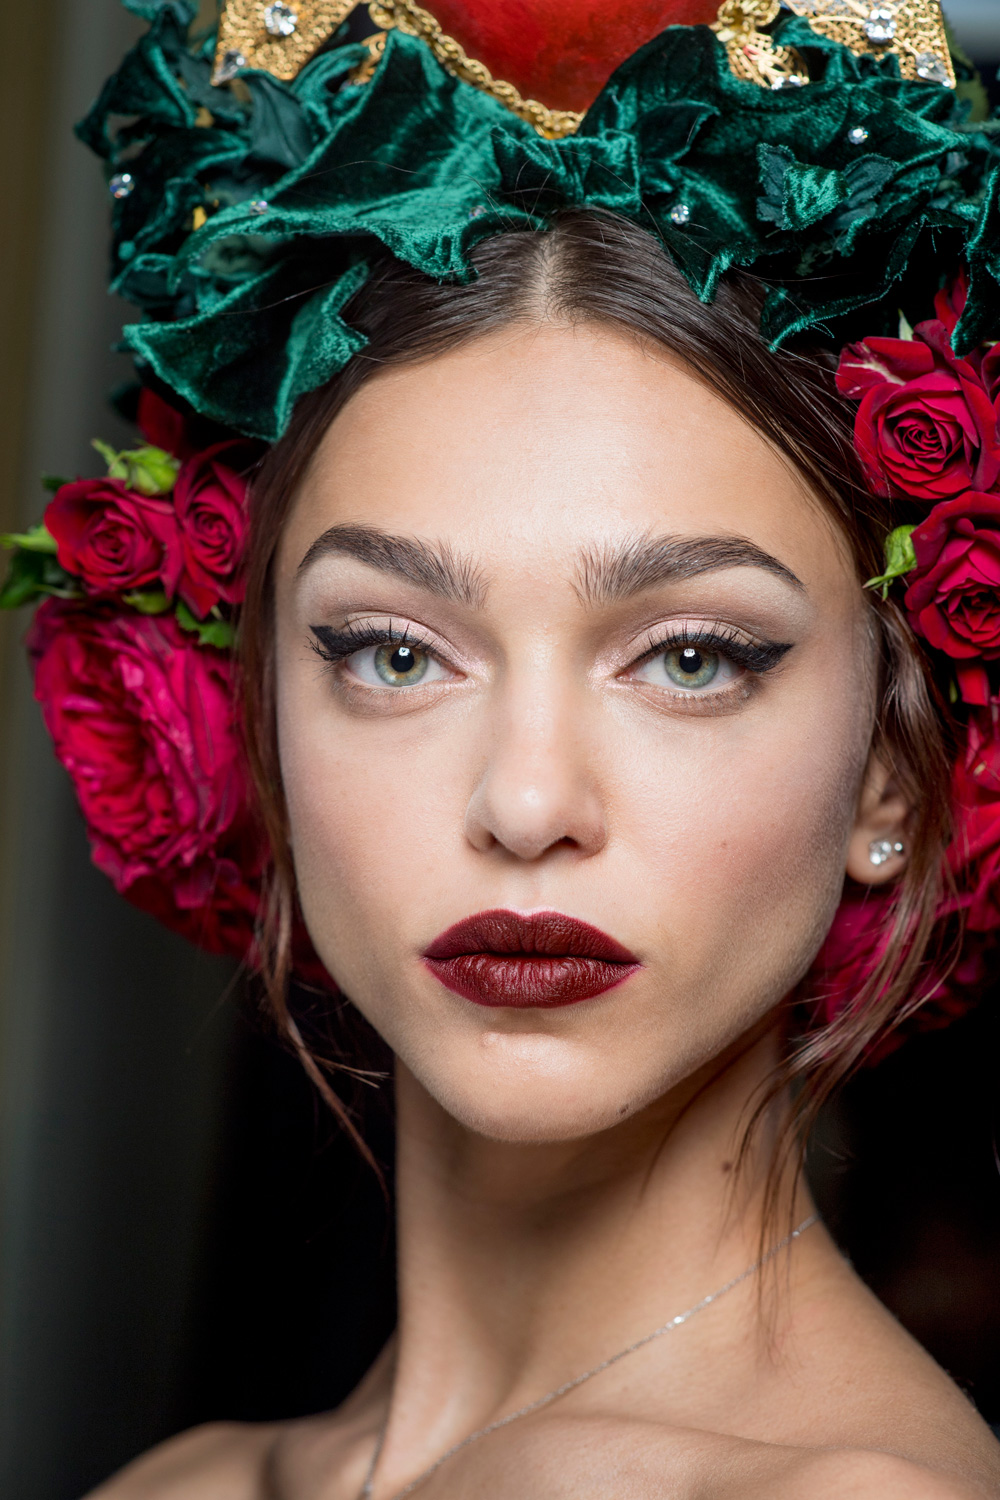 How To Get Dolce And Gabbanas Alto Moda Beauty Look About Her